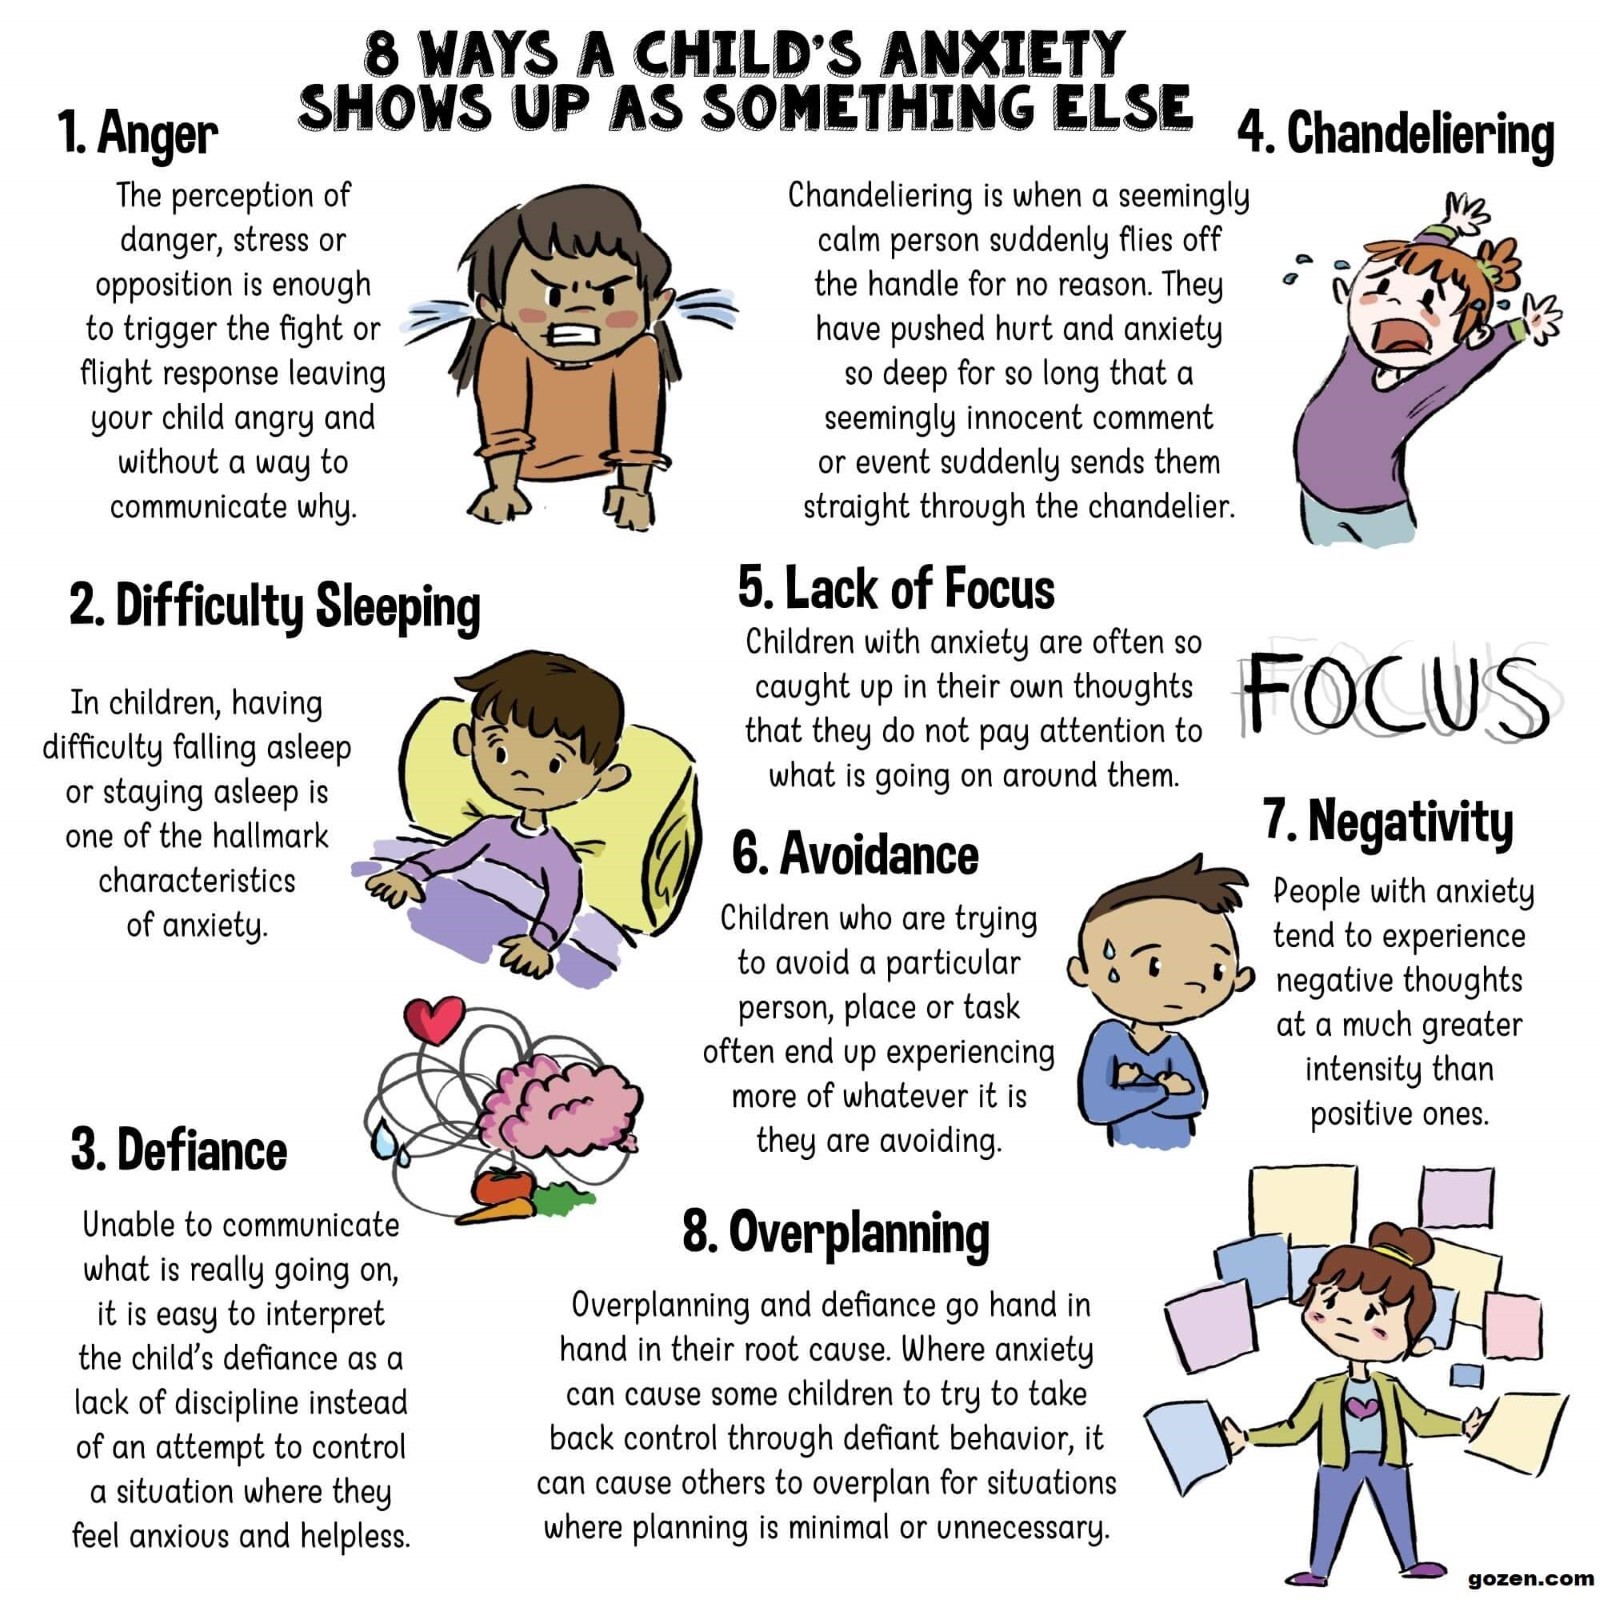 8 Ways a Child's Anxiety Shows Up As Something Else